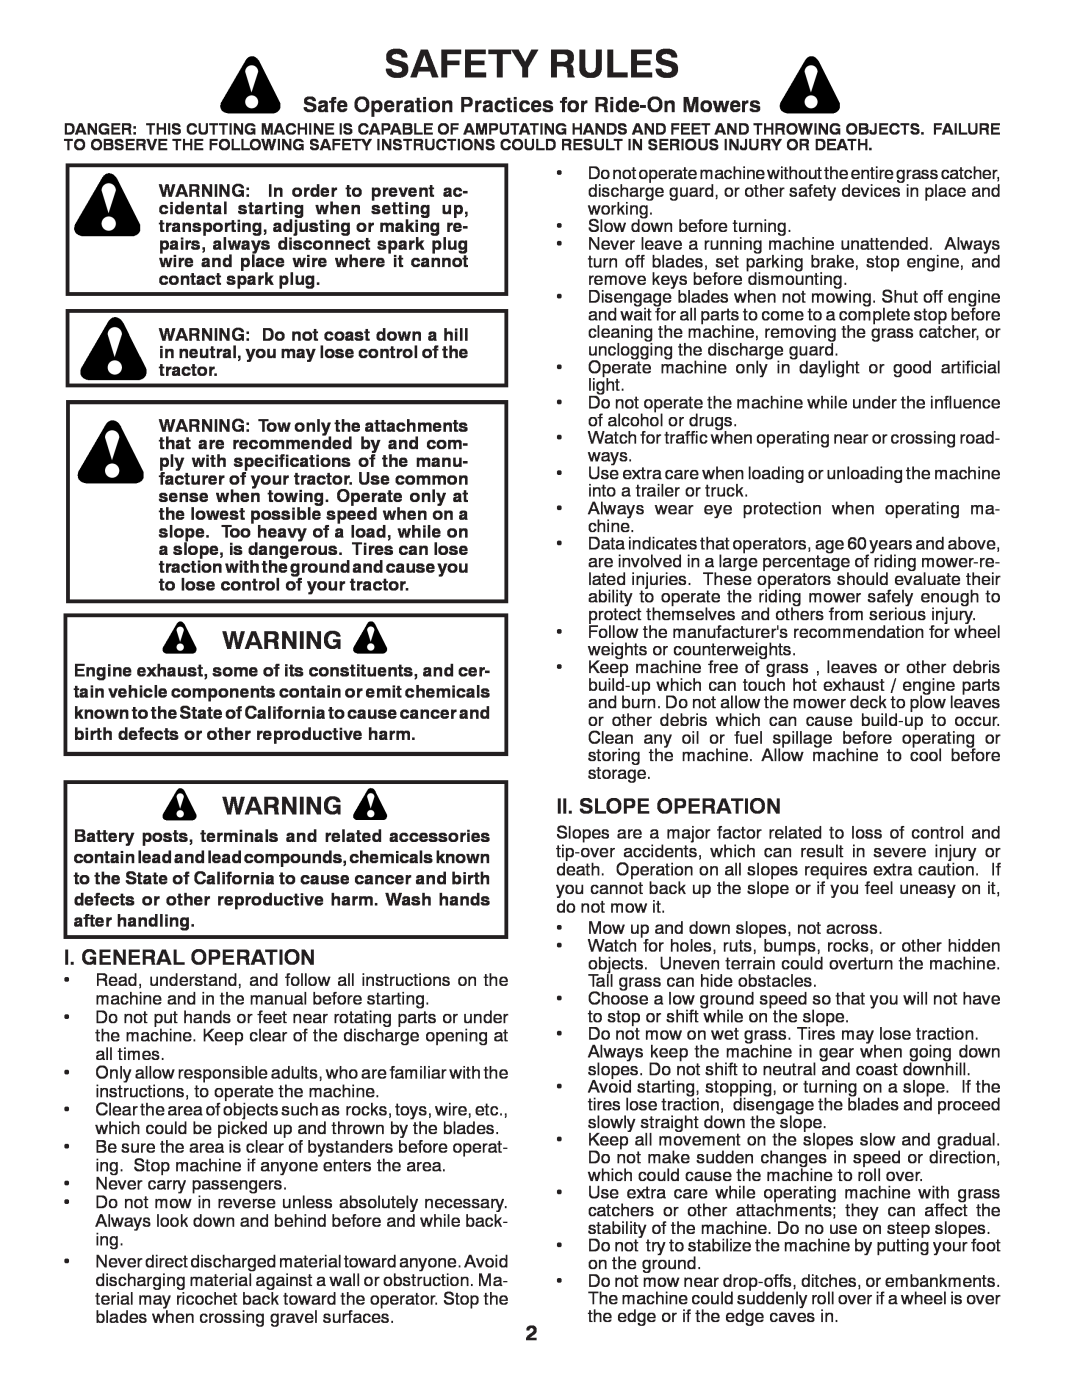 Poulan XT195H46YT Safety Rules, Safe Operation Practices for Ride-On Mowers, I. General Operation, Ii. Slope Operation 